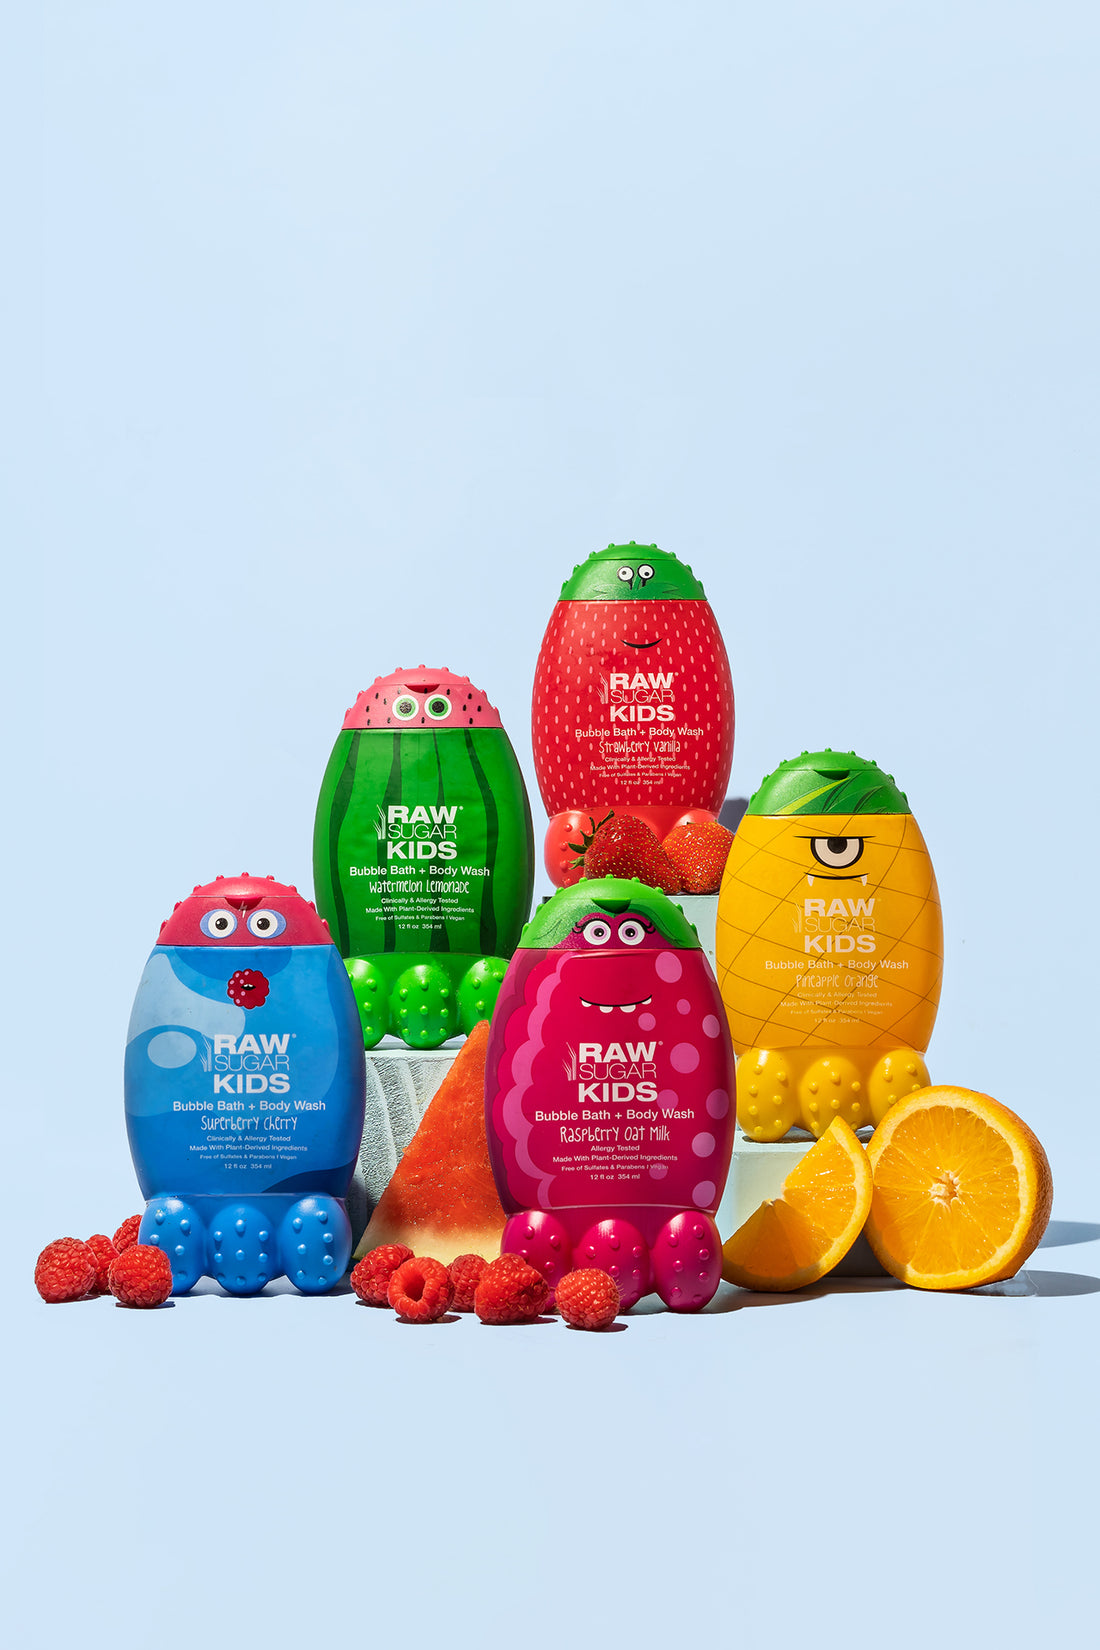 Group of all 5 colorful Raw Sugar Kids Bubble Bath Monsters with fresh raspberries , orange slice/half along with fresh watermelon